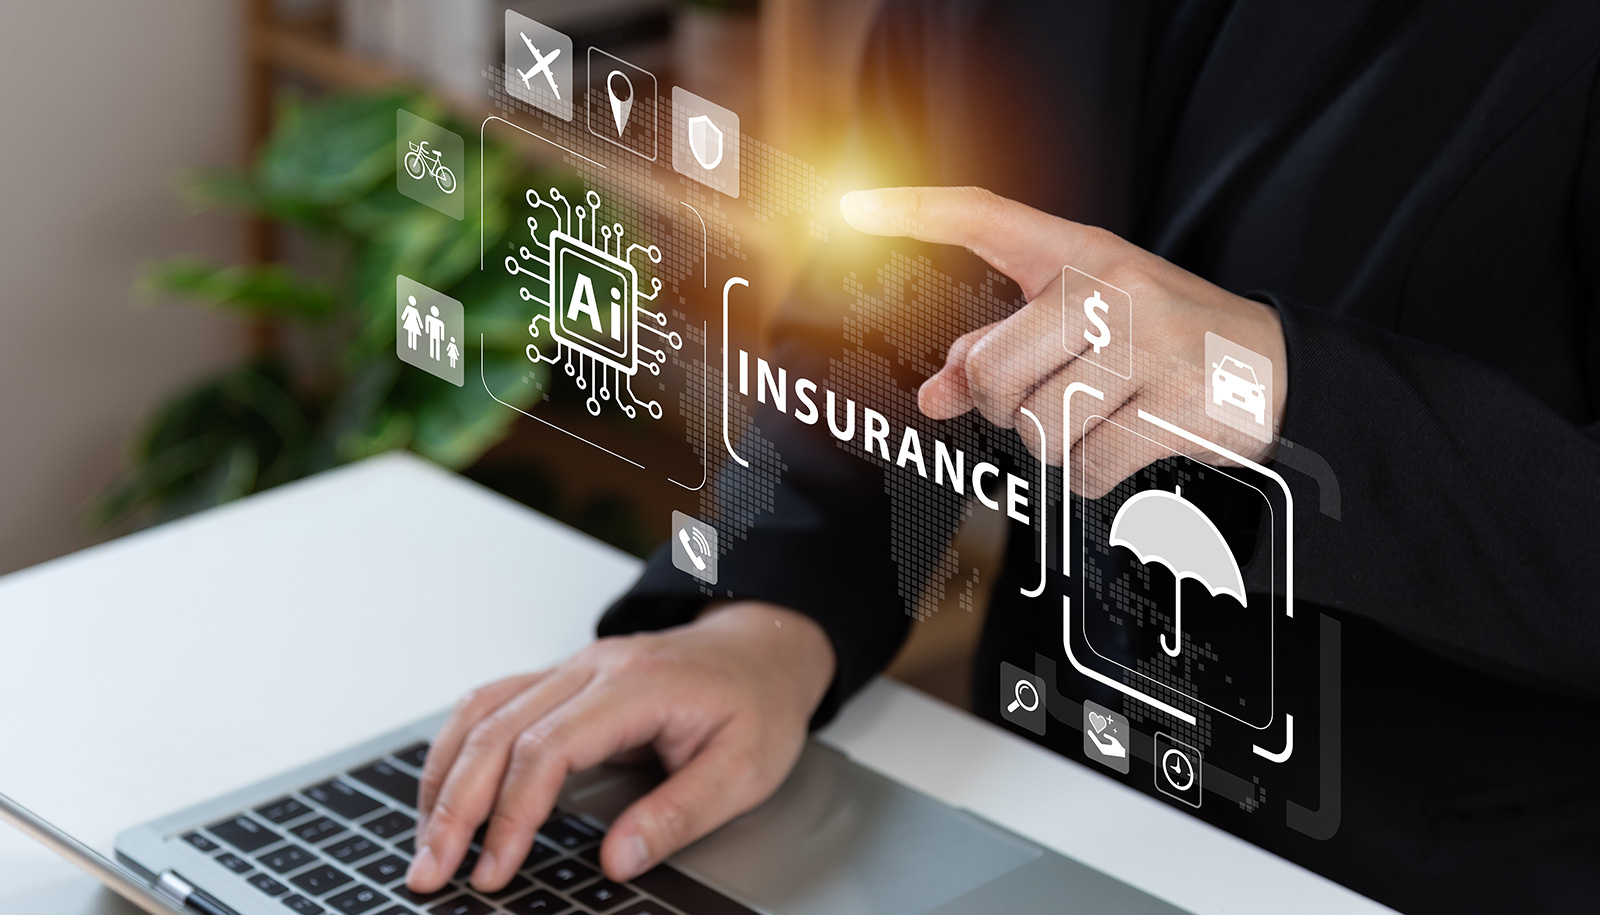 3 Key Trends in How AI is Revolutionizing the Insurance Industry